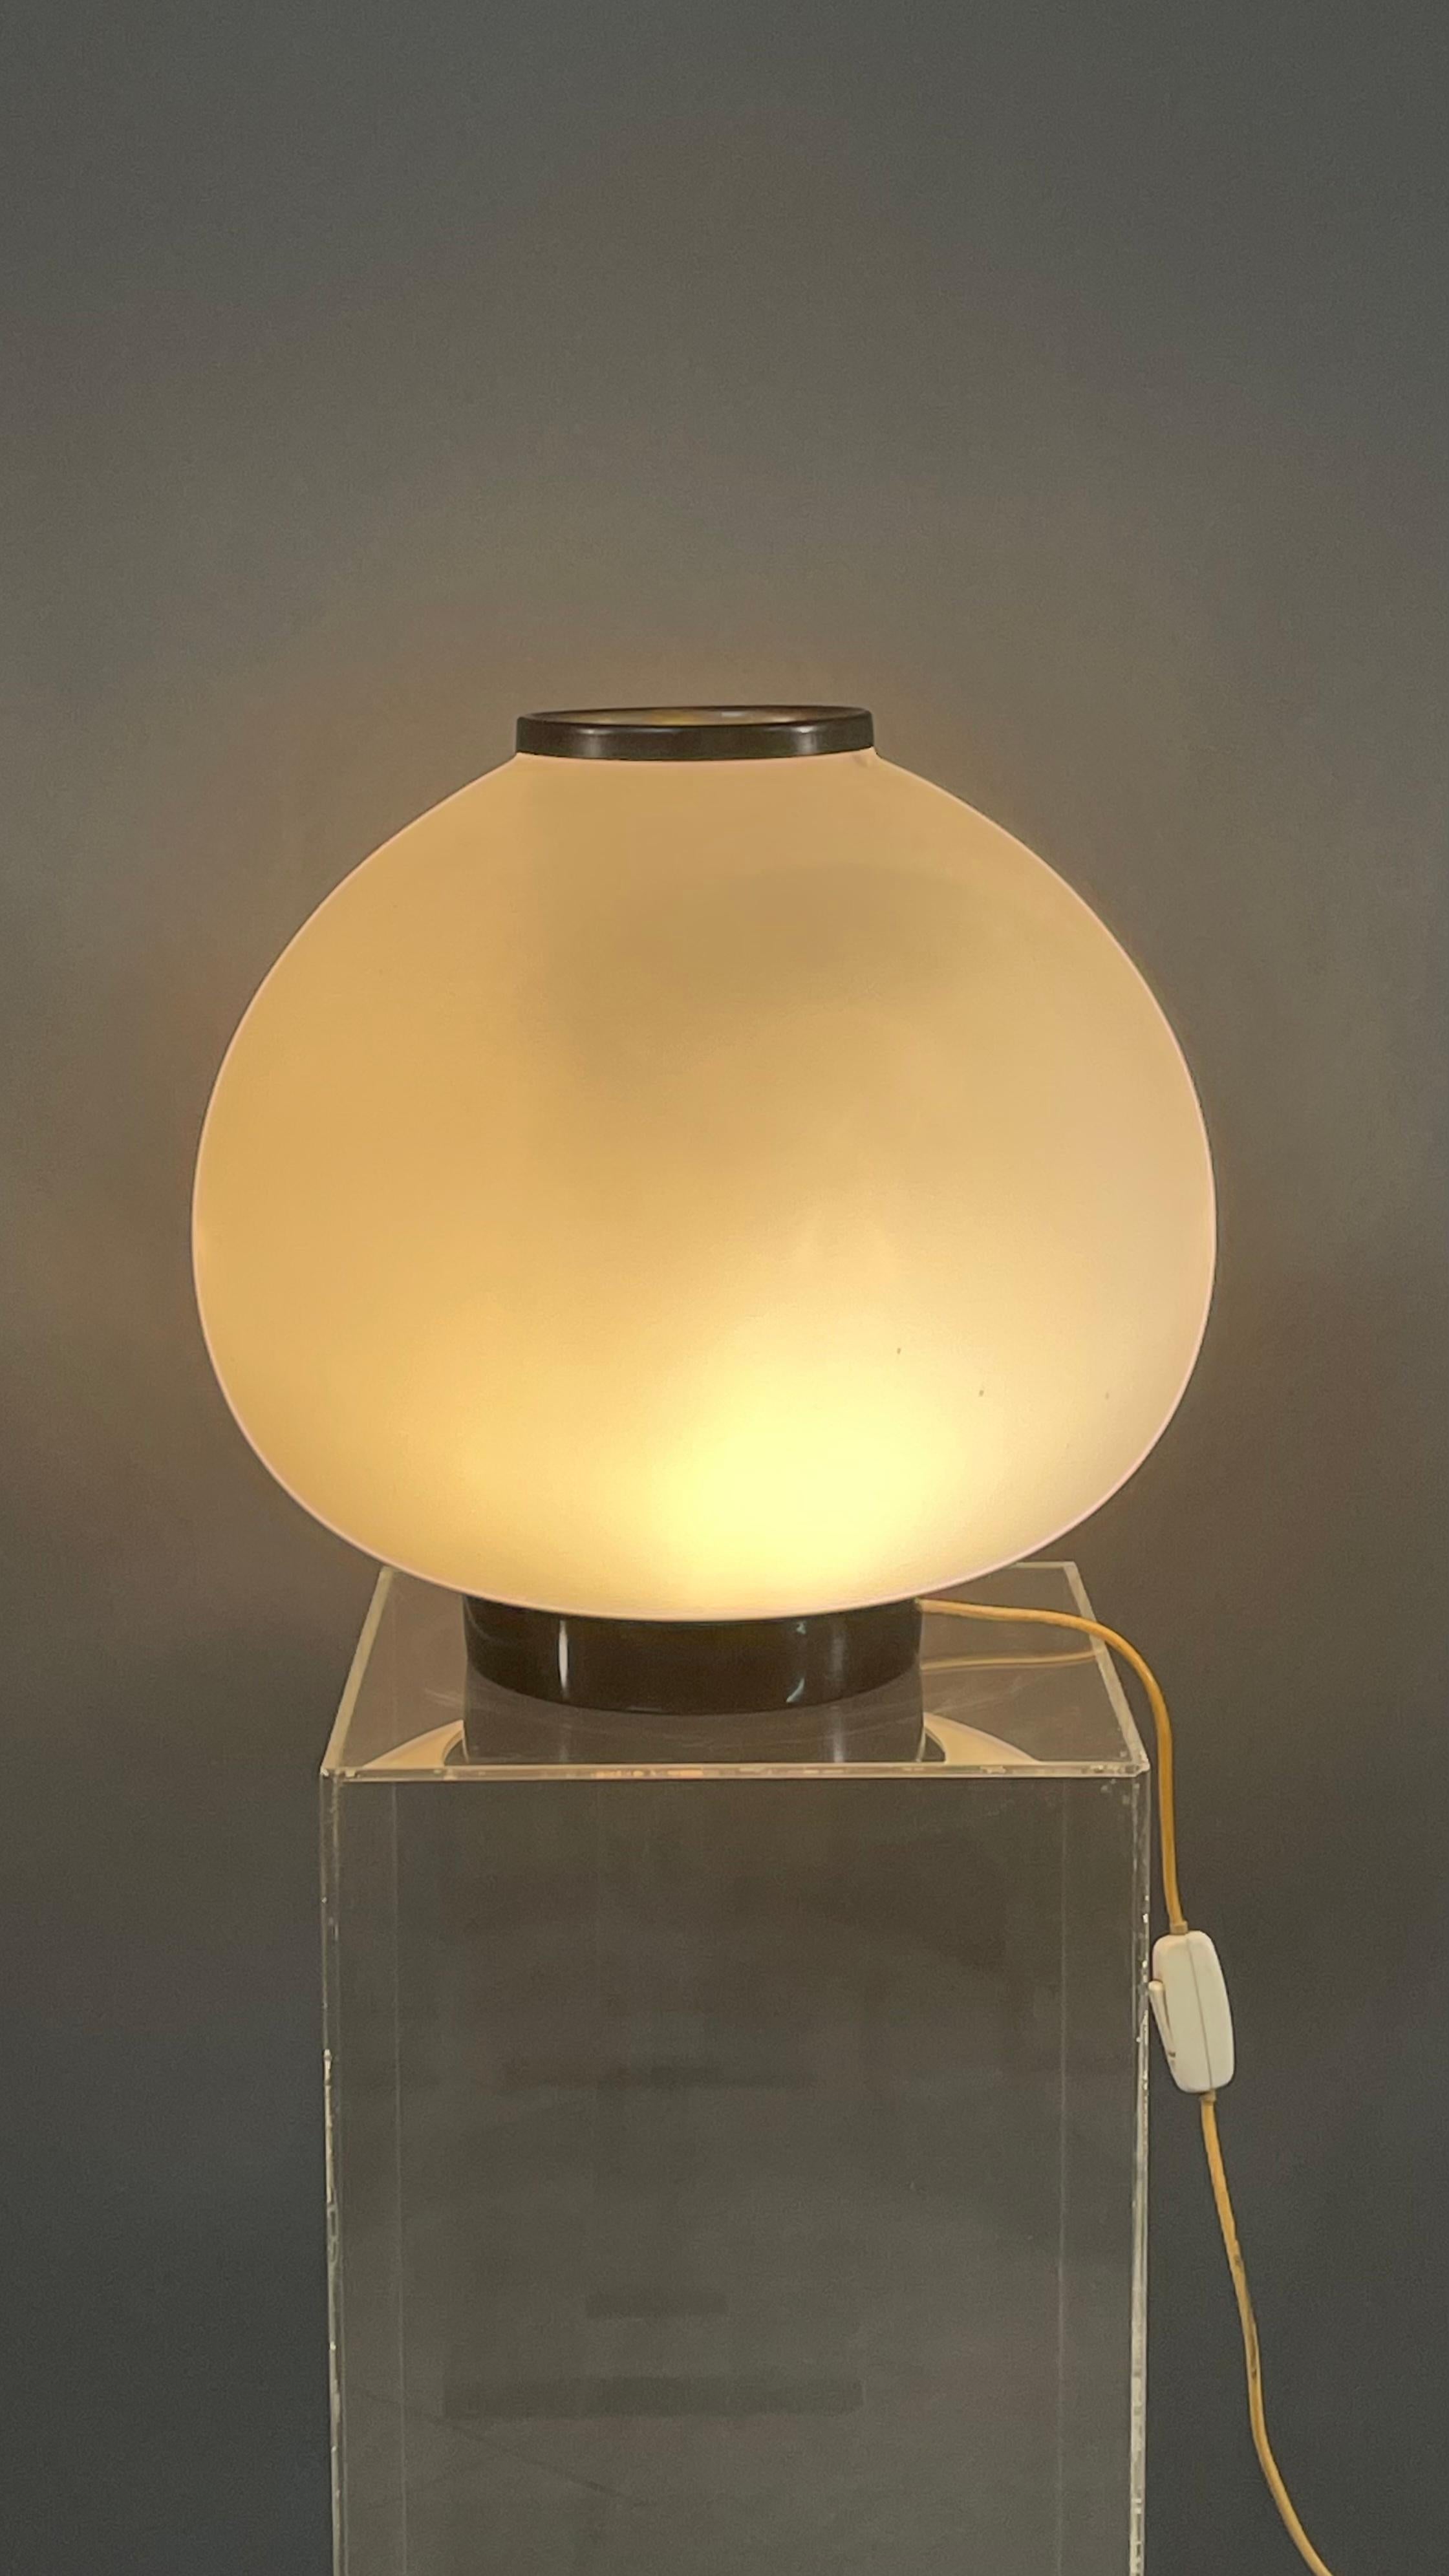 Important and very rare opaline glass table lamp produced by Stilnovo in the 1960s.
Signed on the electrical socket.
Brass details 
The very elegant shape and refined design, make this opaline glass lamp a small masterpiece and an exclusive